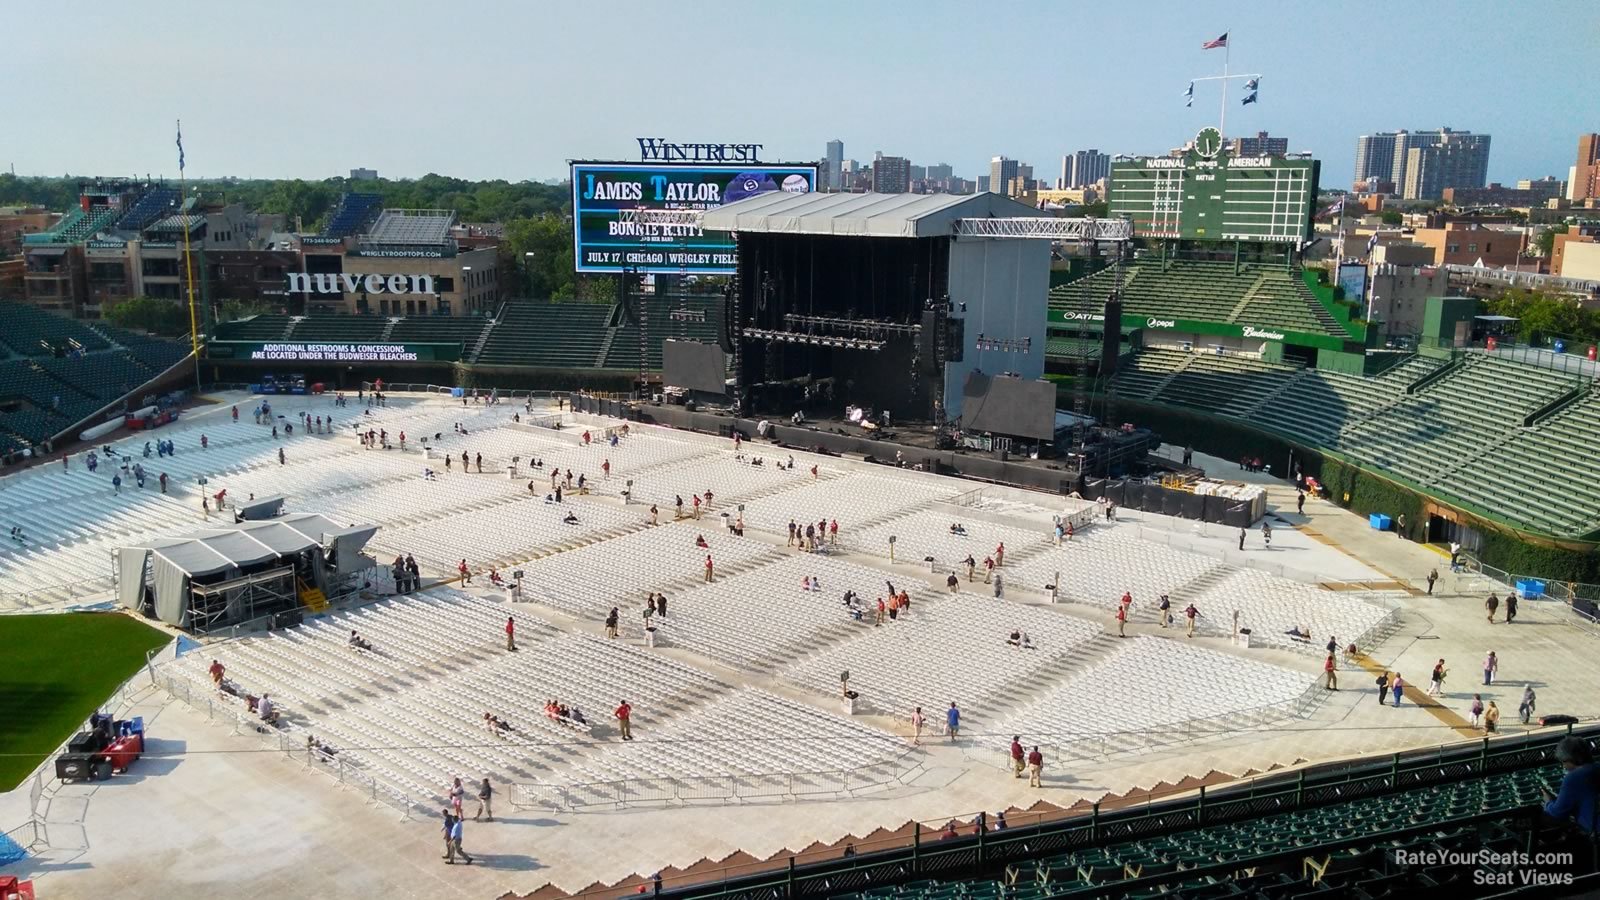 Dead And Company Wrigley Field 2019 Seating Chart